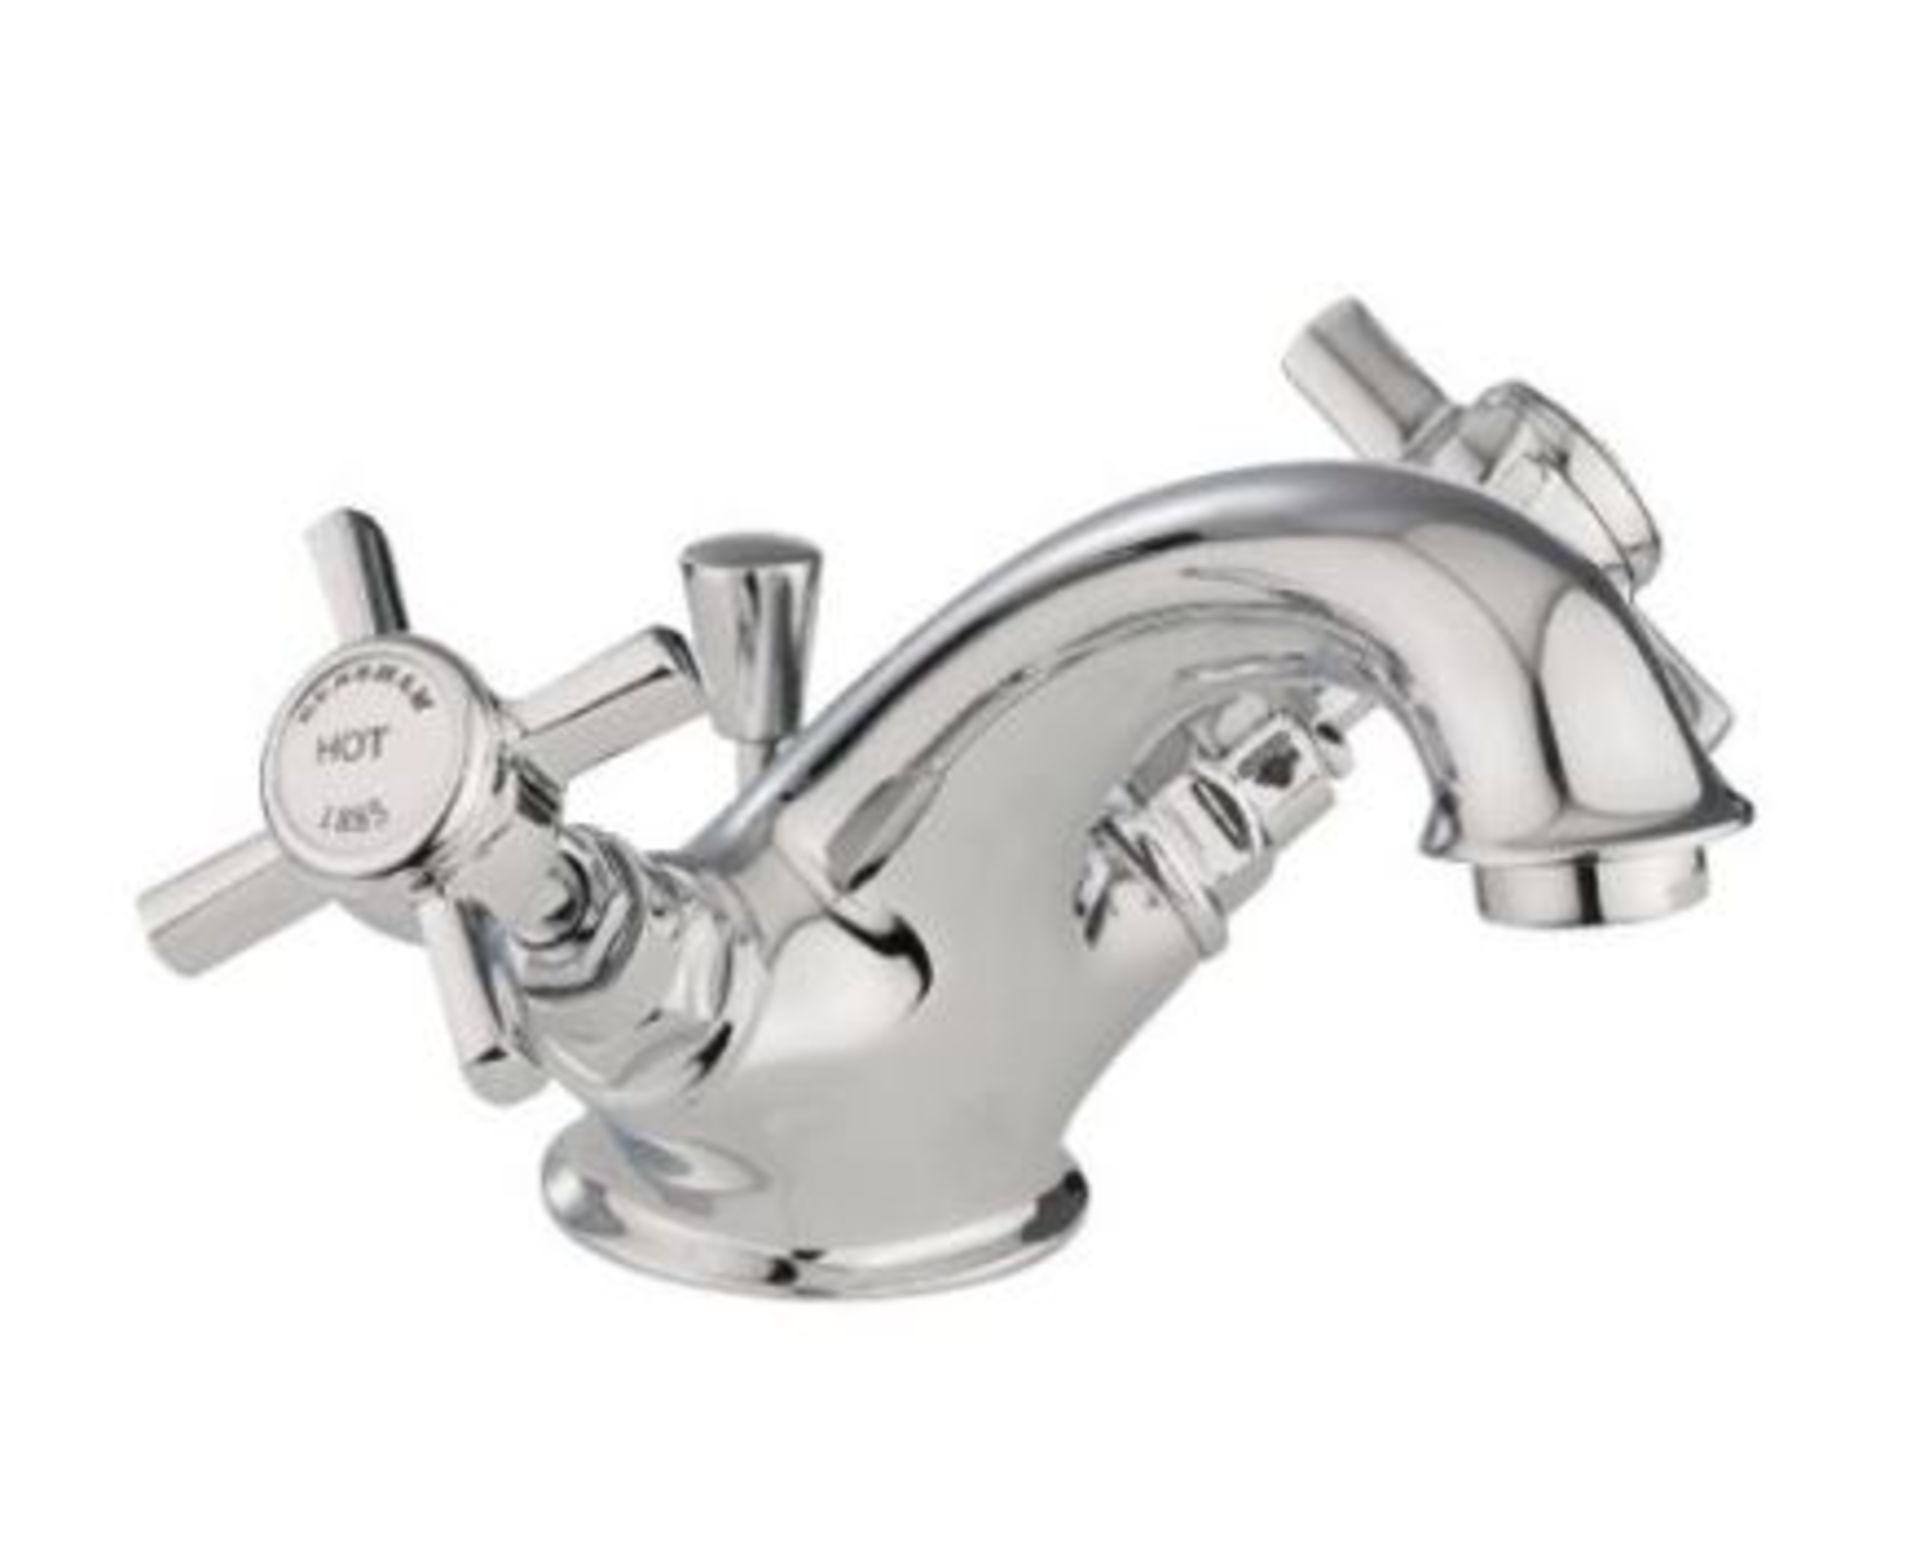 Bathstore Bensham Traditional Mono Basin Mixer Tap With Pop Up Waste Kit. Solid Brass Body. High Qu - Image 3 of 3